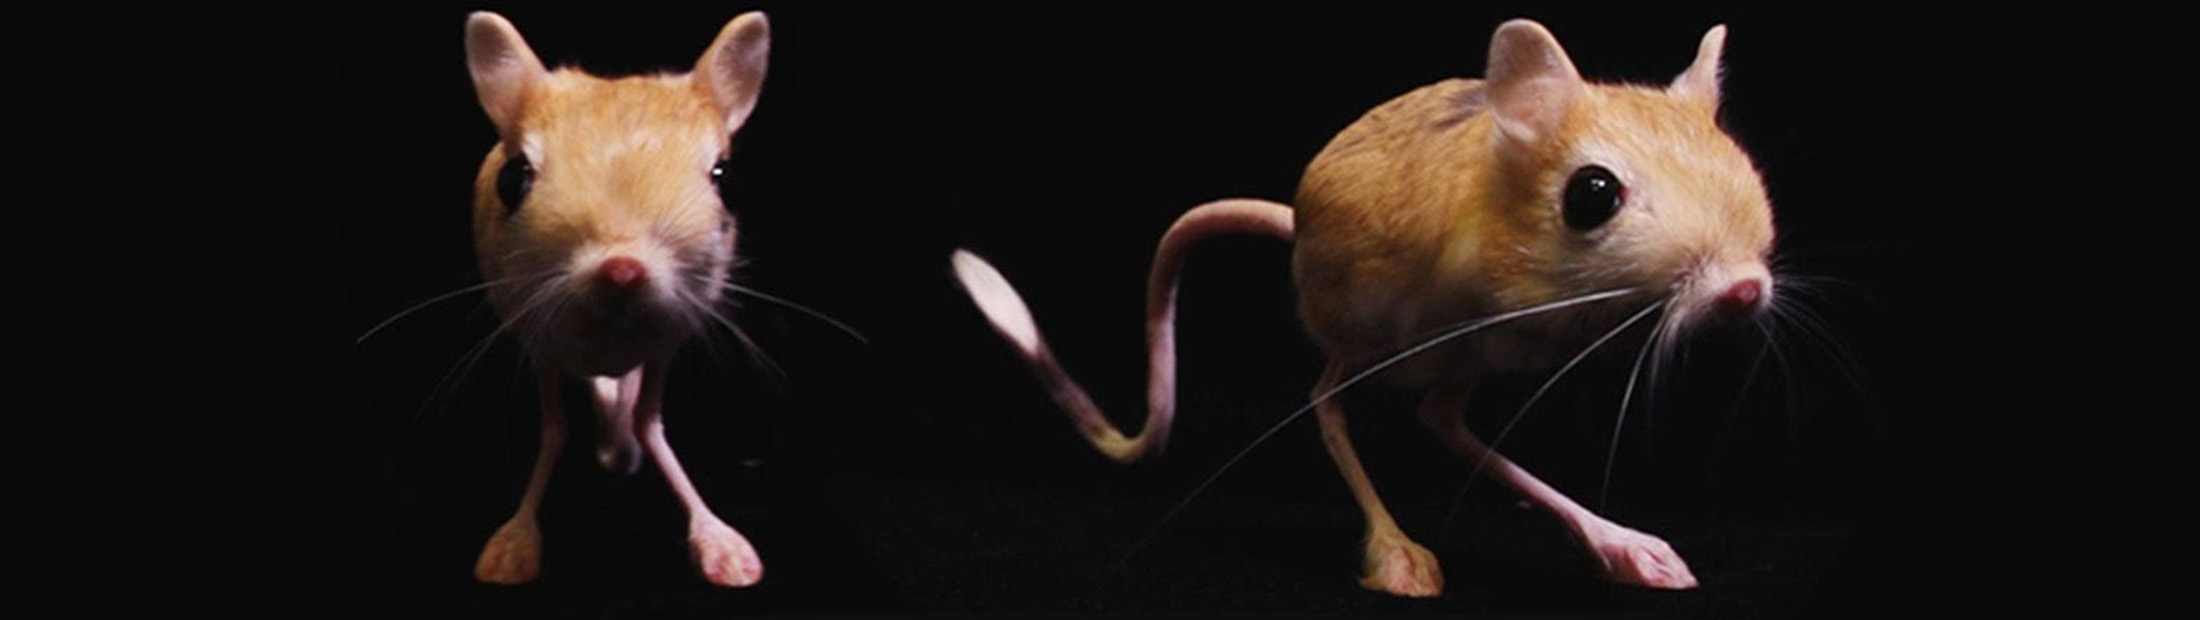 Tiny bipedal desert rodent with elongated tail used as a model by researchers